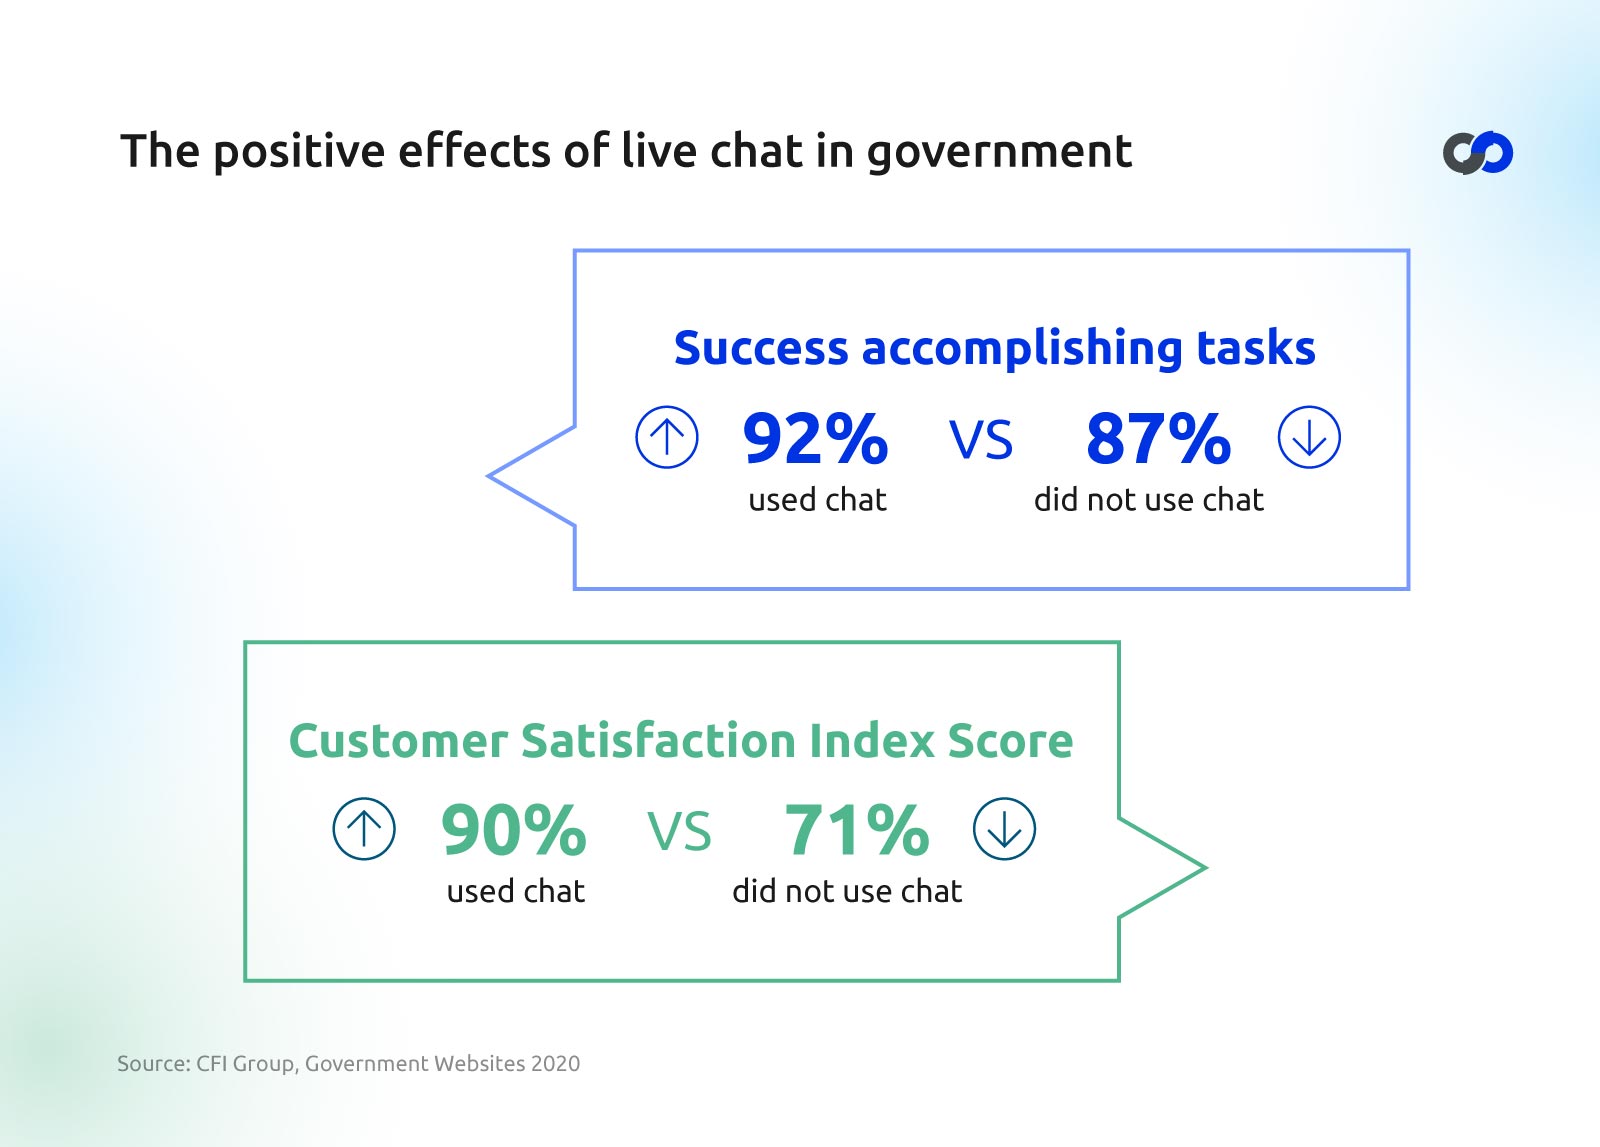 The positive effects of live chat in government